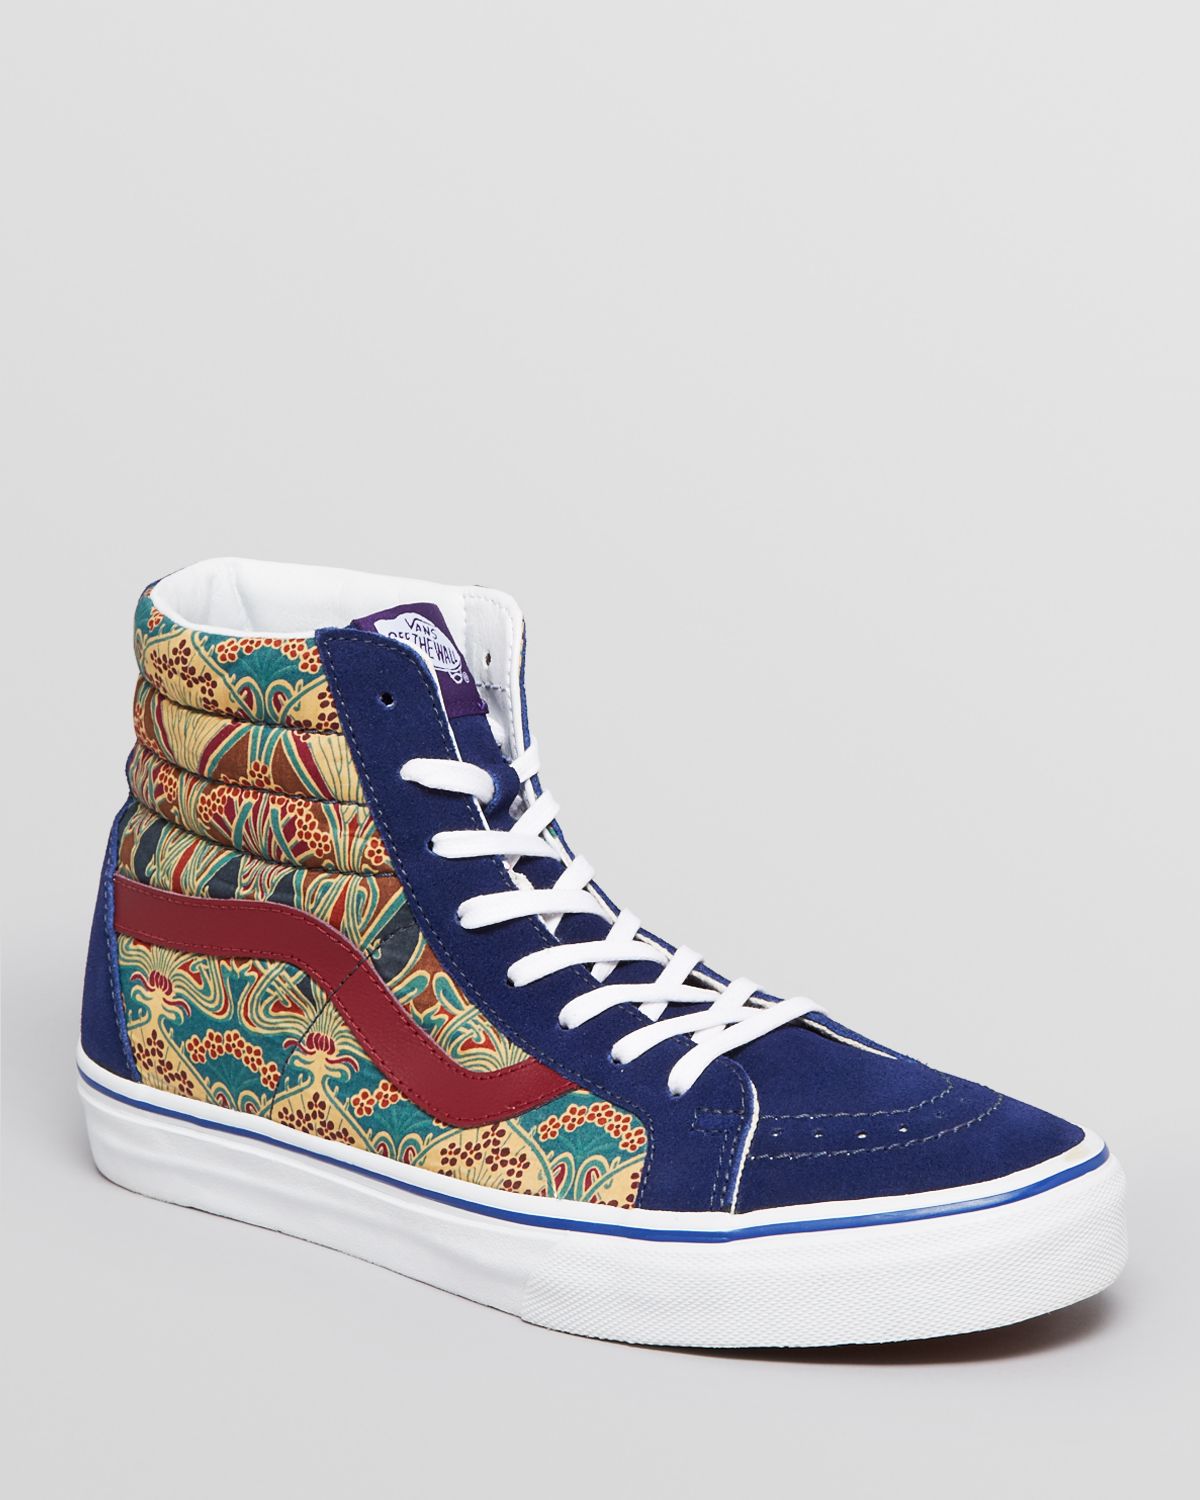 blue and white vans high top